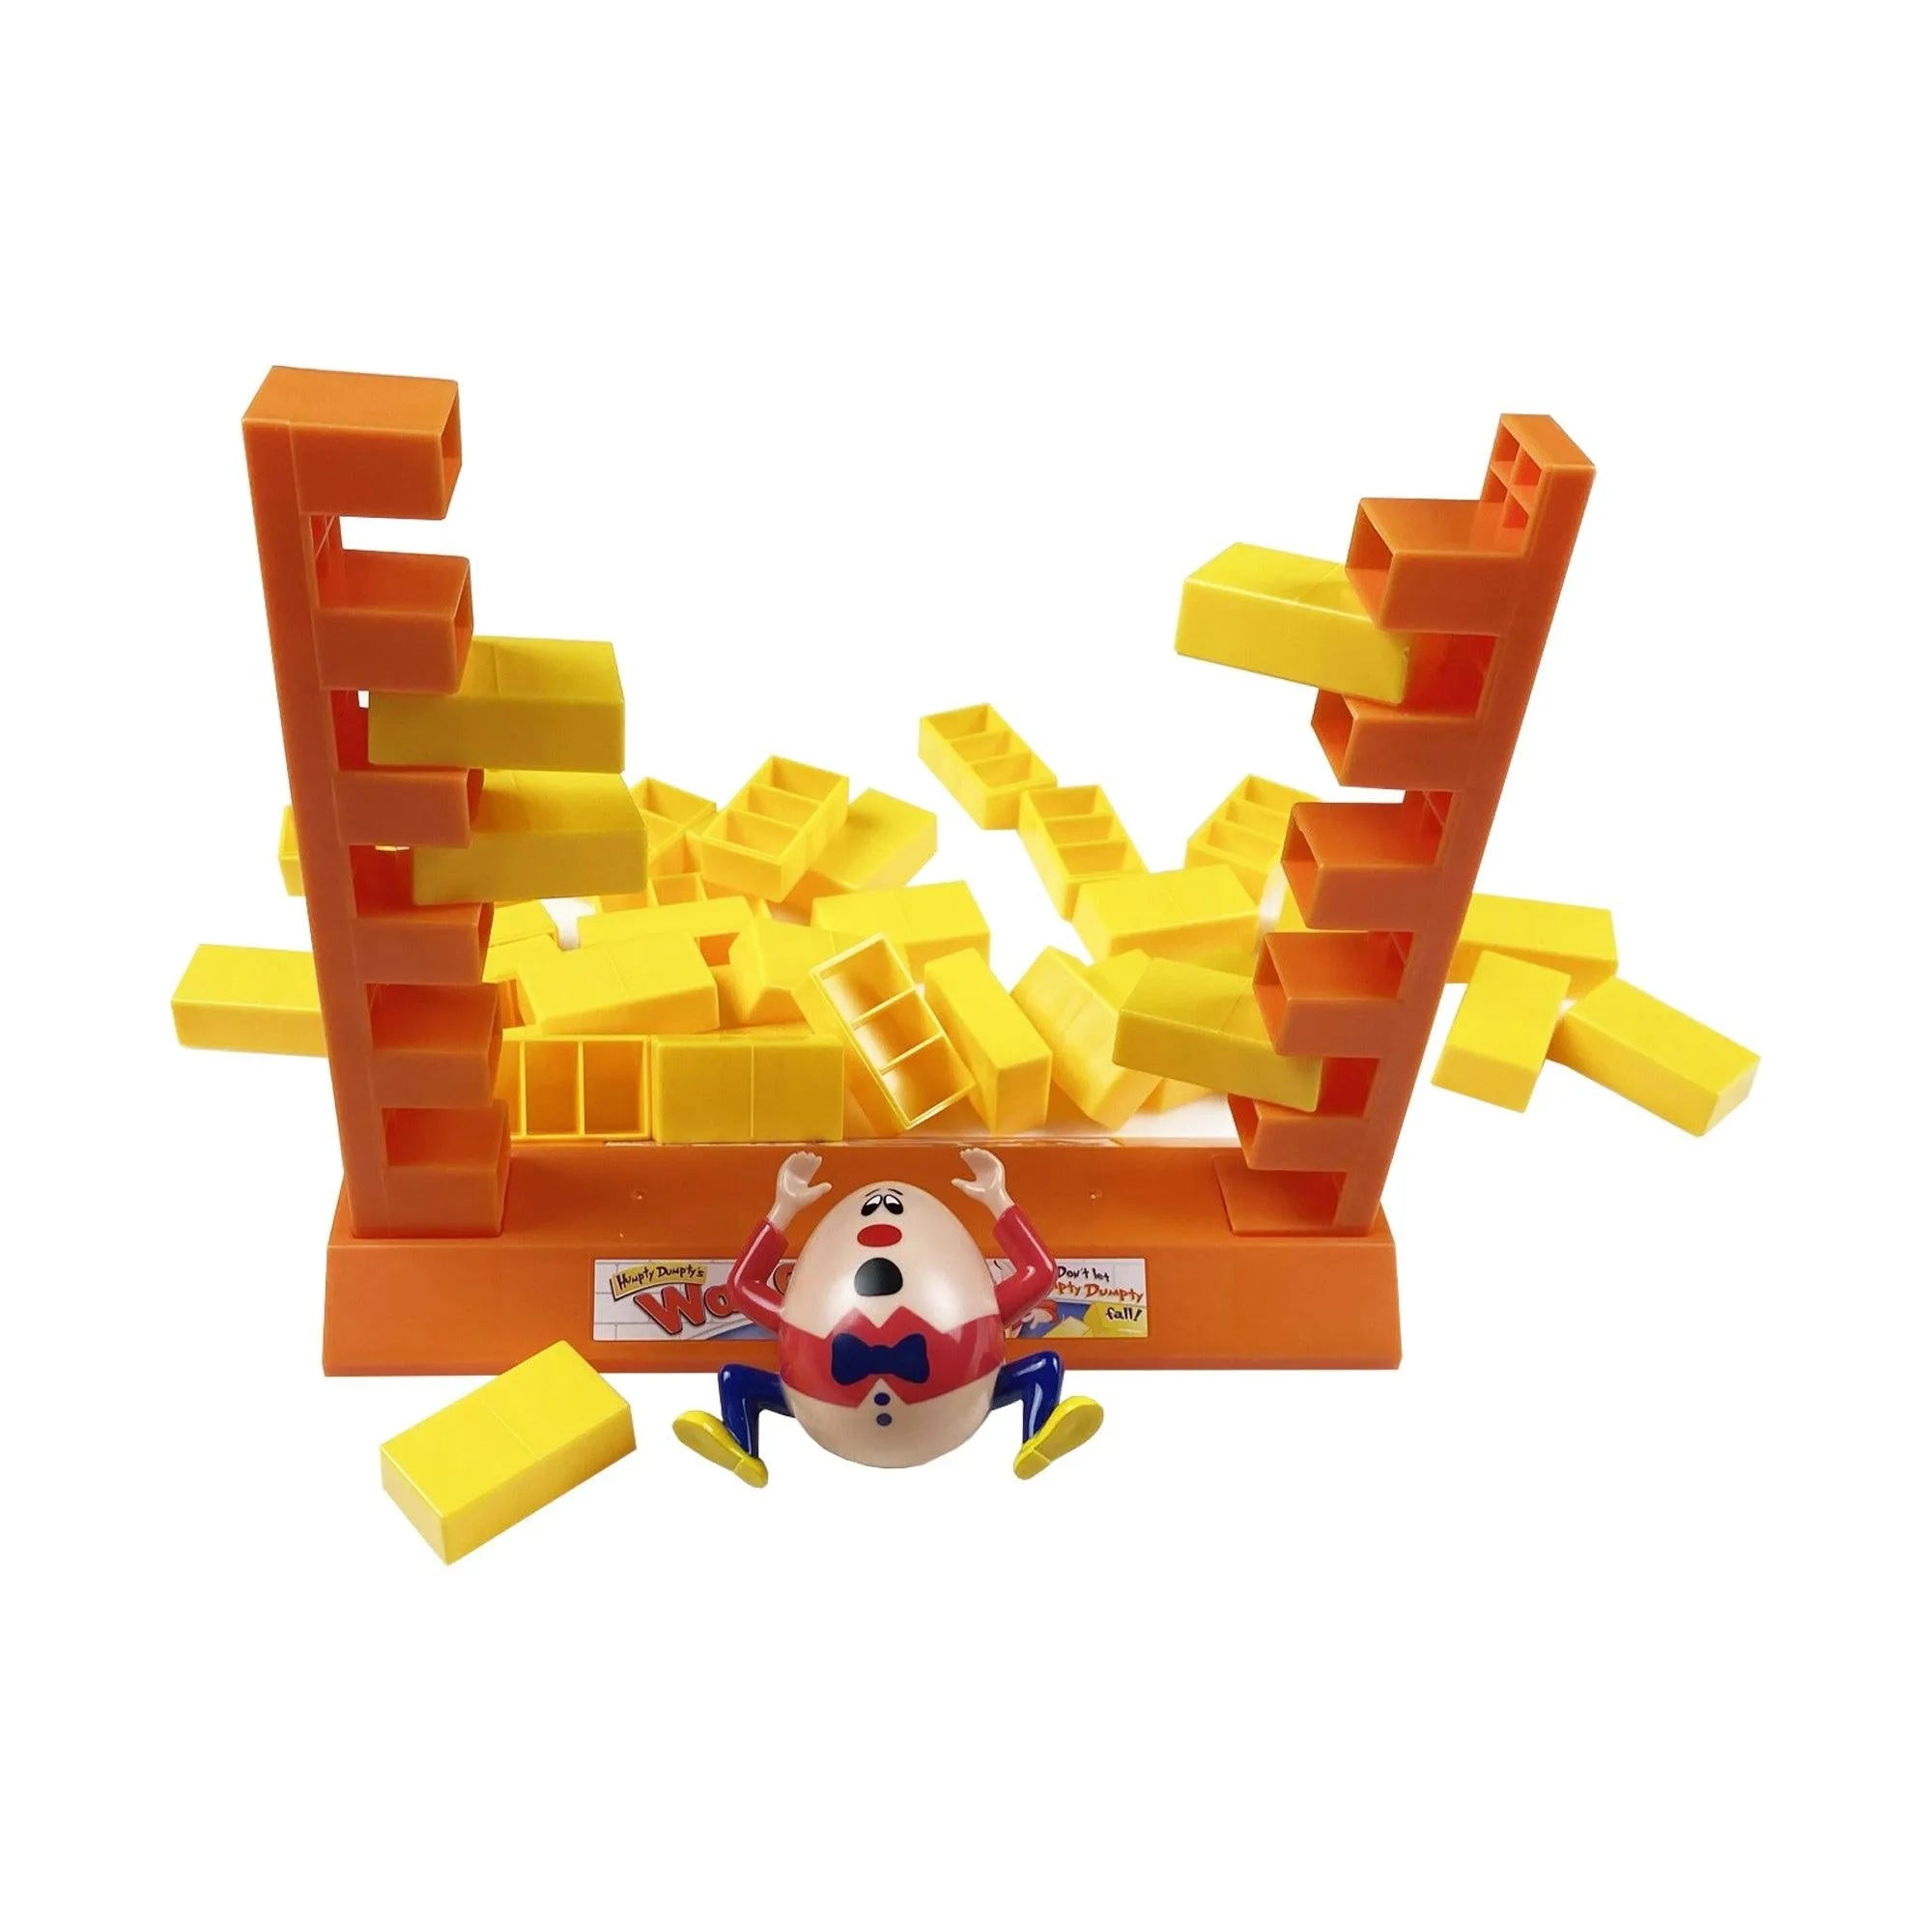 Fallen Humpty Dumpty View - where to buy humpty dumpty toys - shop at the toy room